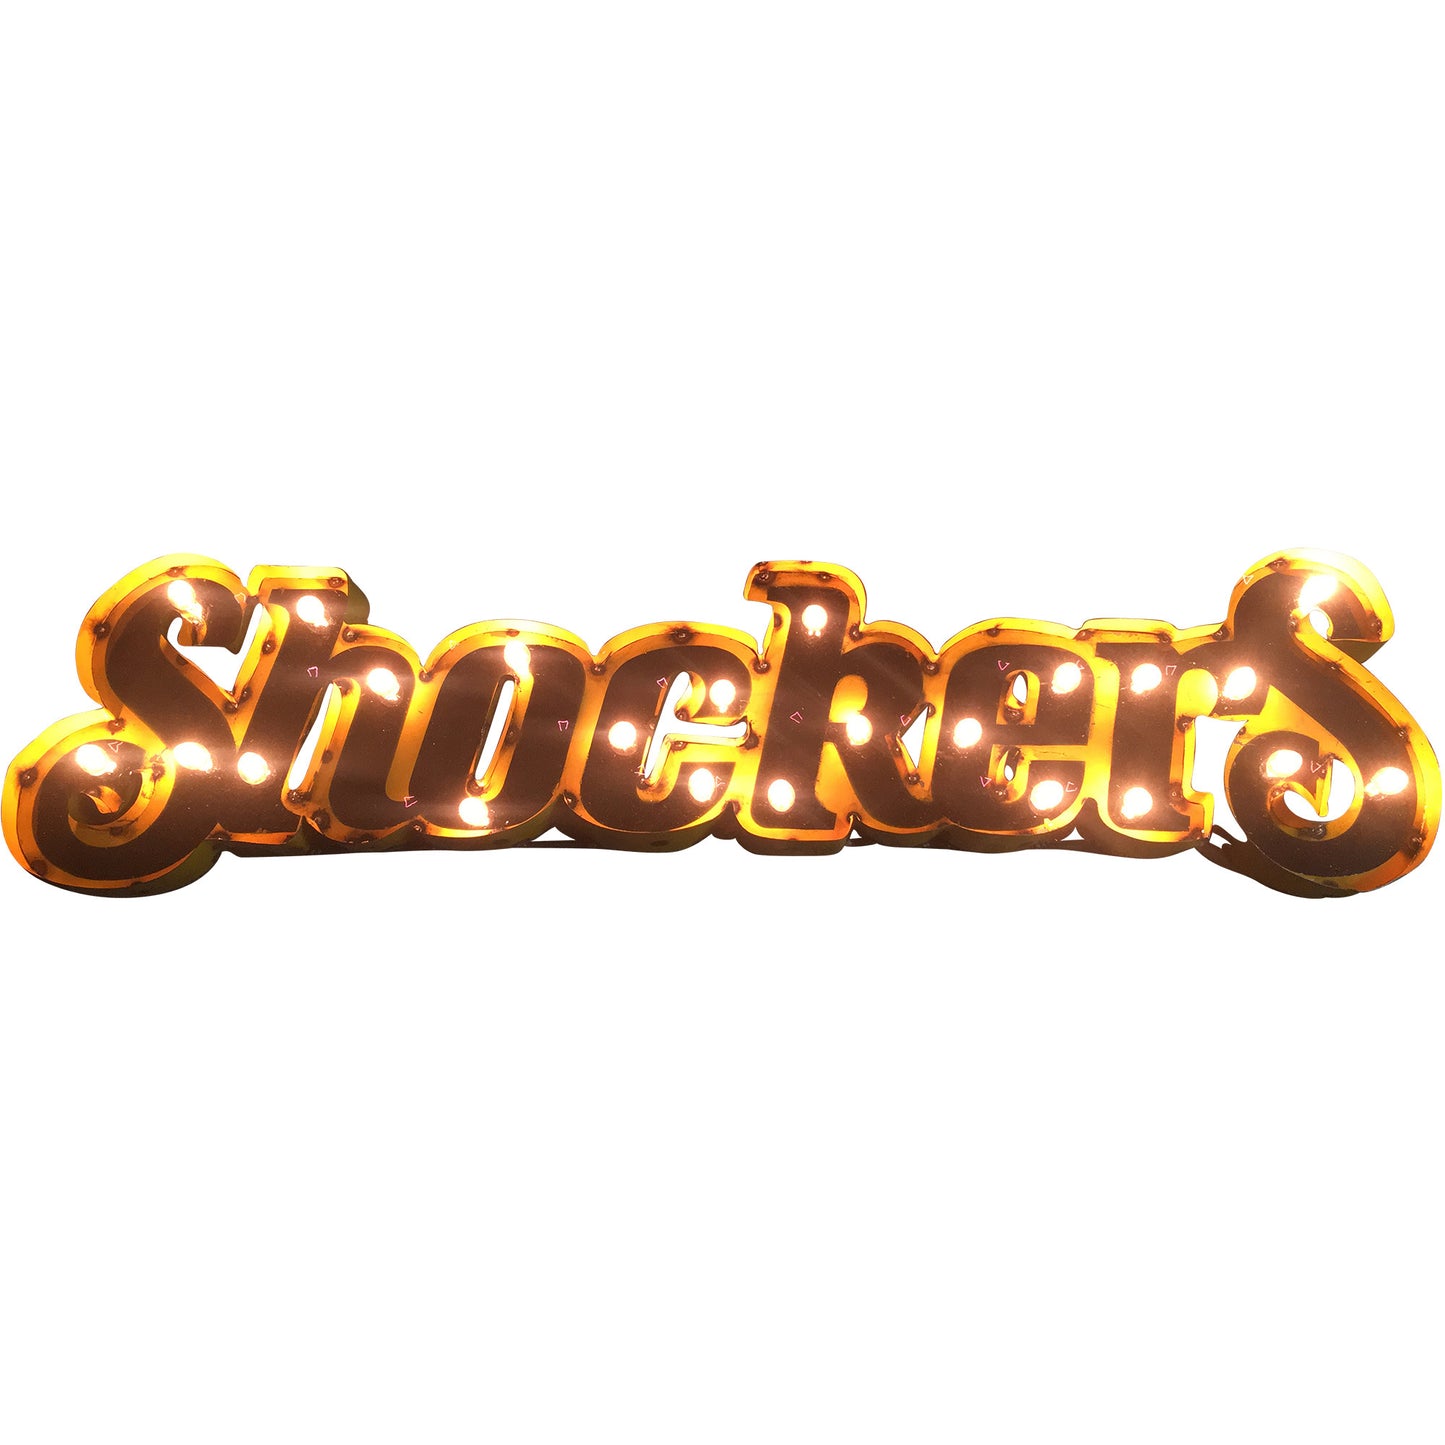 Wichita State University "Shockers" Lighted Recycled Metal Wall Decor